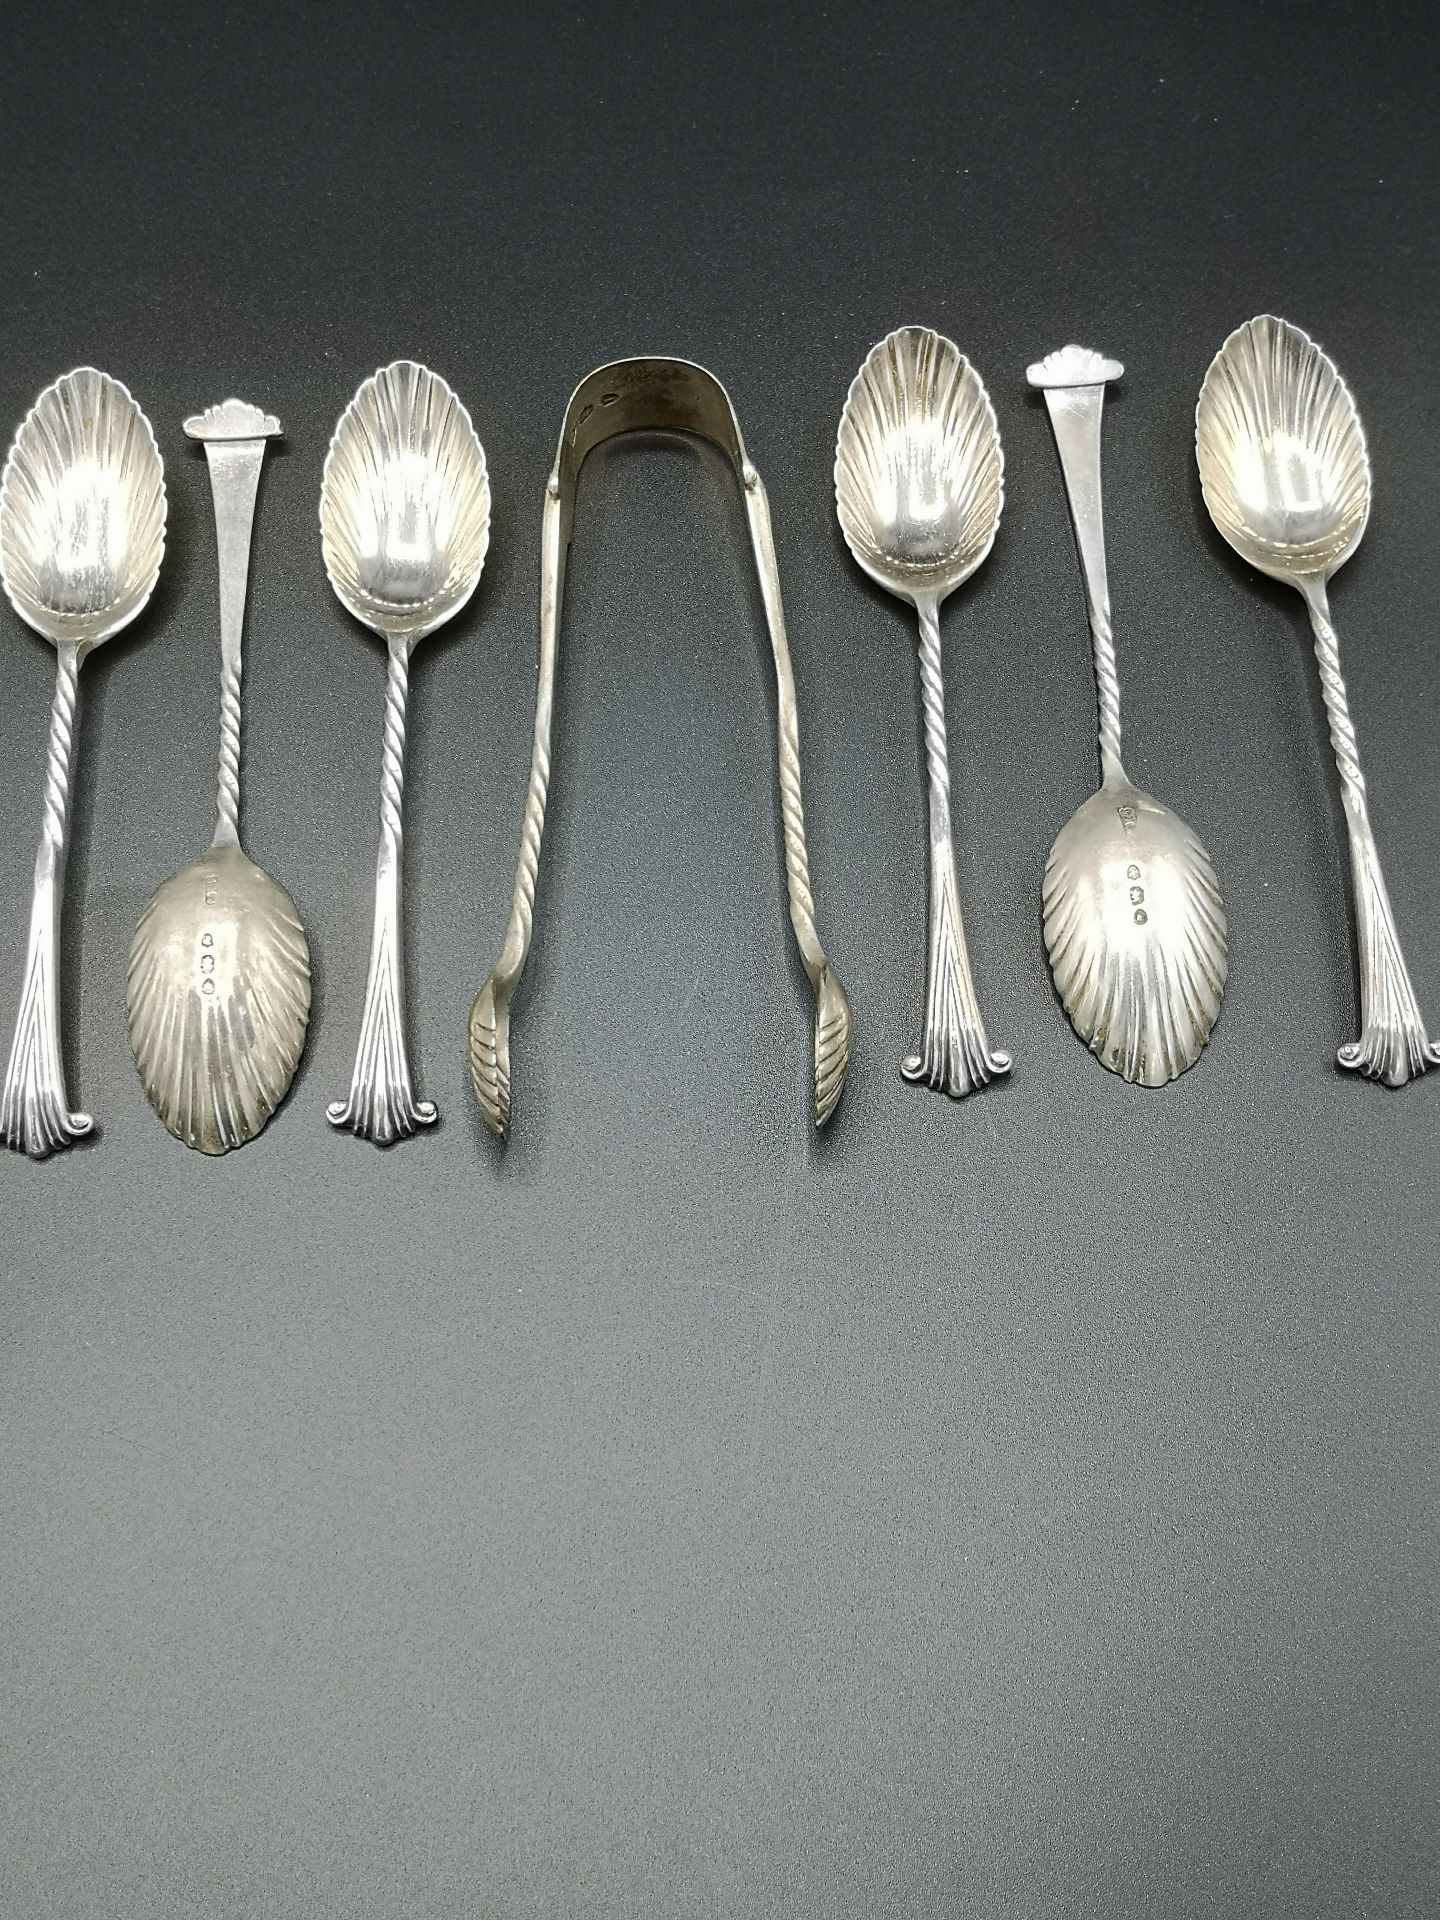 Two sets of silver tea spoons - Image 6 of 7